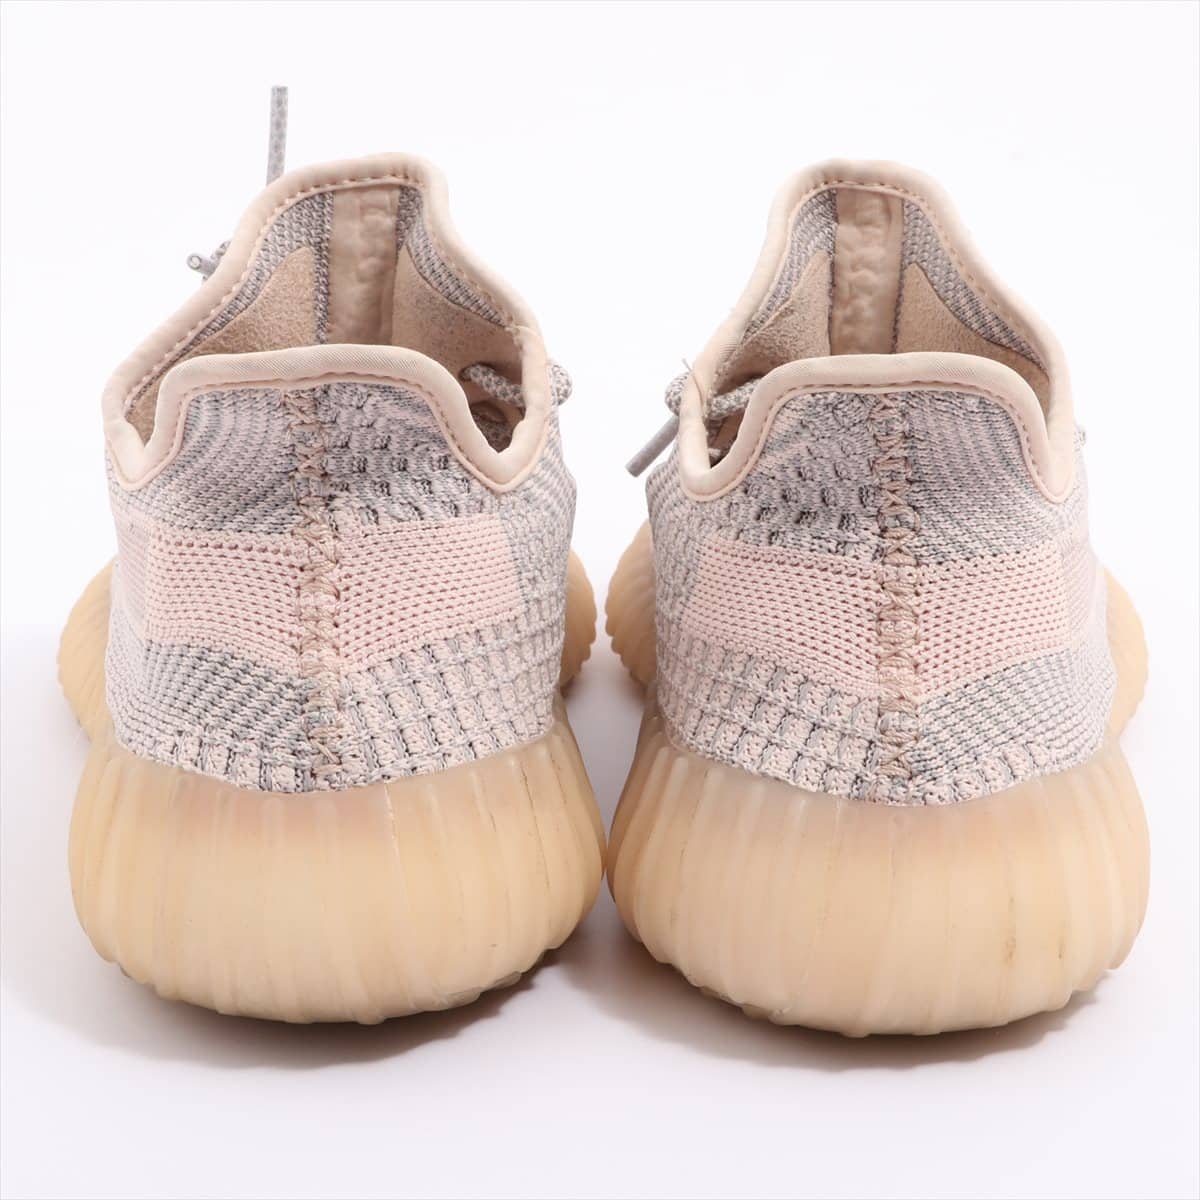 Adidas YEEZY BOOST 350 V2 Knit Sneakers 26.5cm Men's Pink